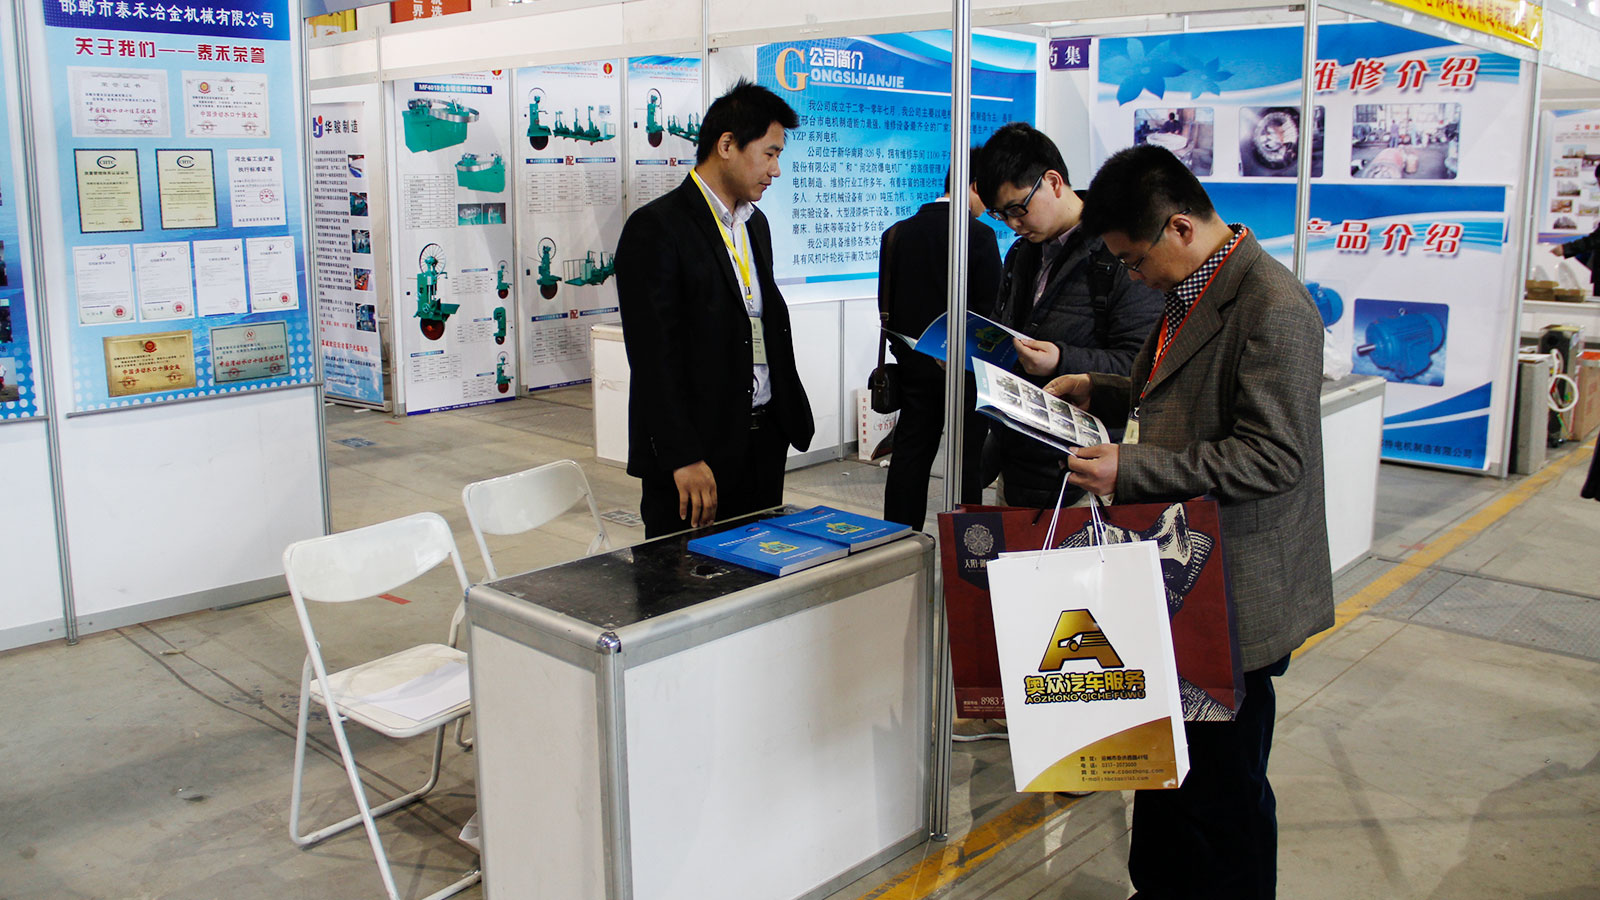 Taihe actively participates in industry exhibitions to enhance market influence.